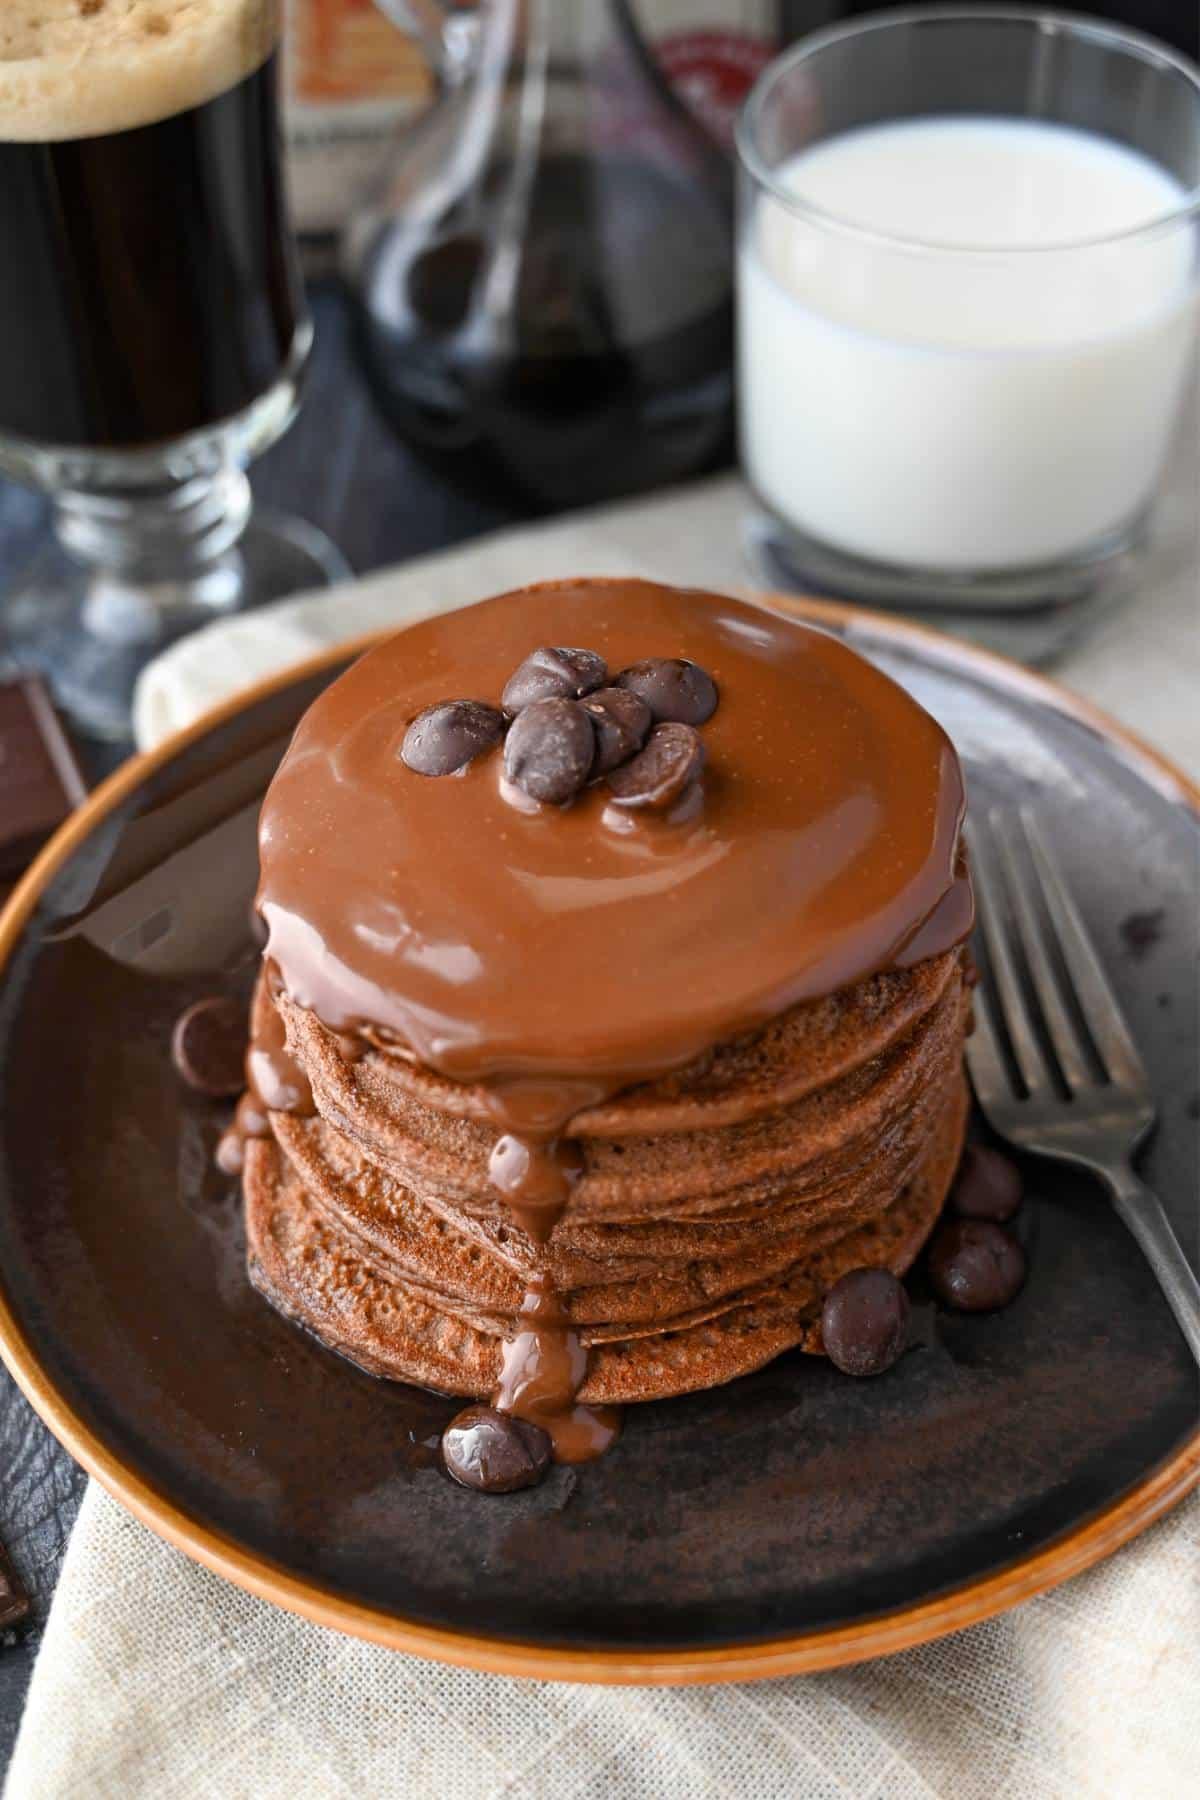 a stack of chocolate pancakes with poured healthier chocolate sauce and a glass of milk and coffee in the background